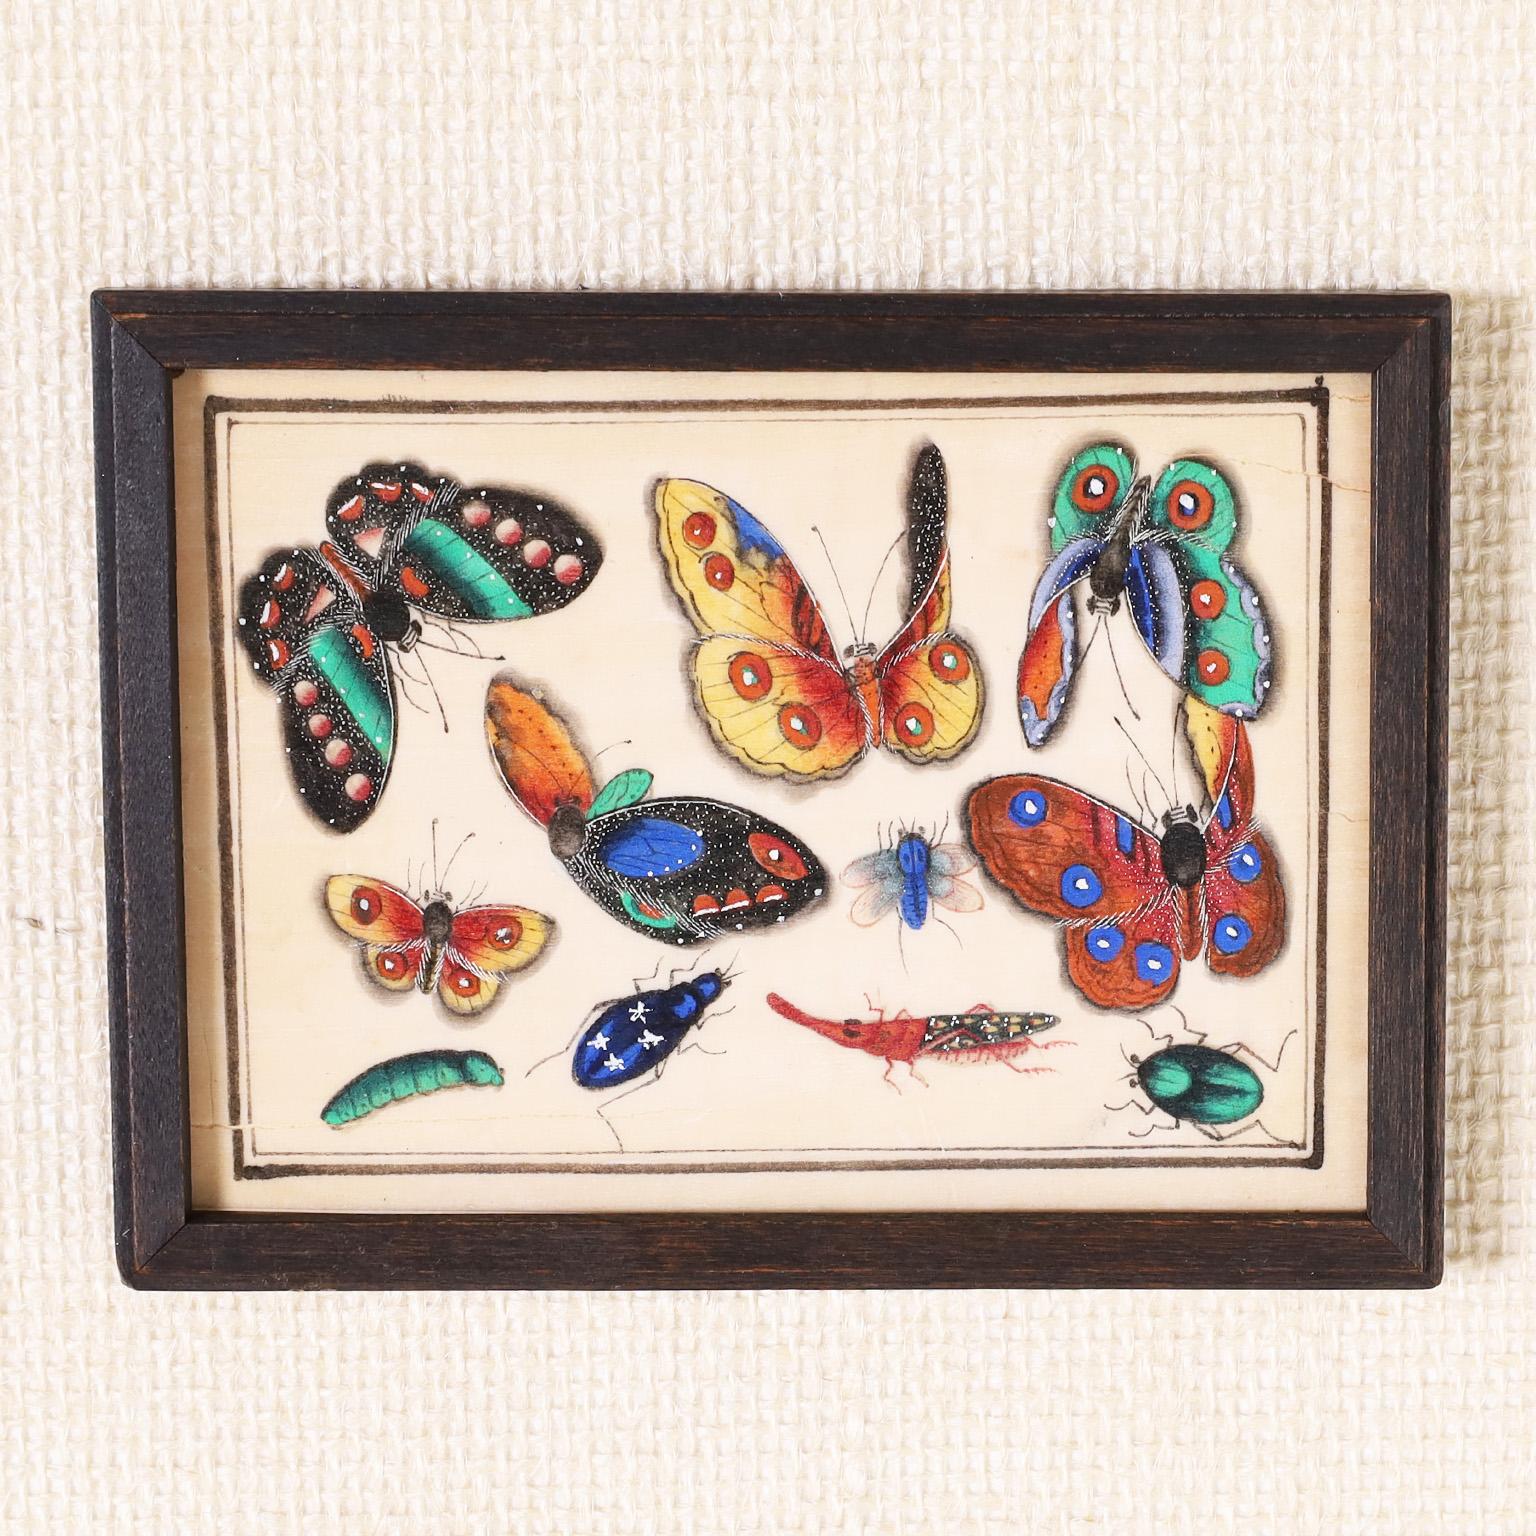 Rare and remarkable set of twelve 19th century Chinese watercolors on pith paper depicting moth species and assorted other insects, executed in glorious vivid colors. Presented under glass in a frame within a frame.